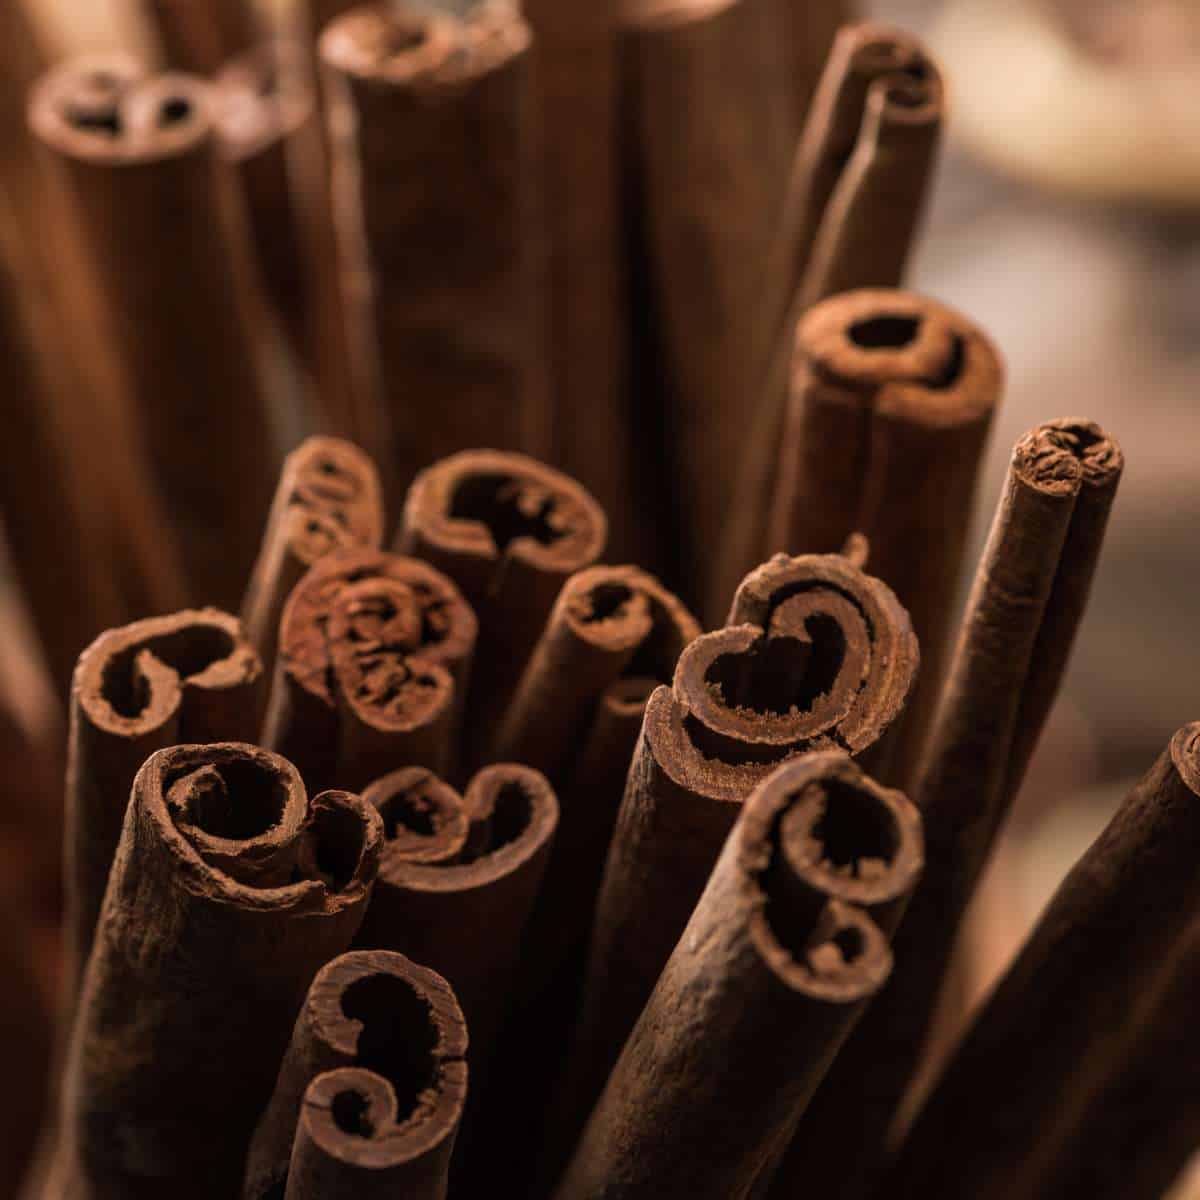 A close up of cinnamon sticks, known for their association with prosperity, on a table.